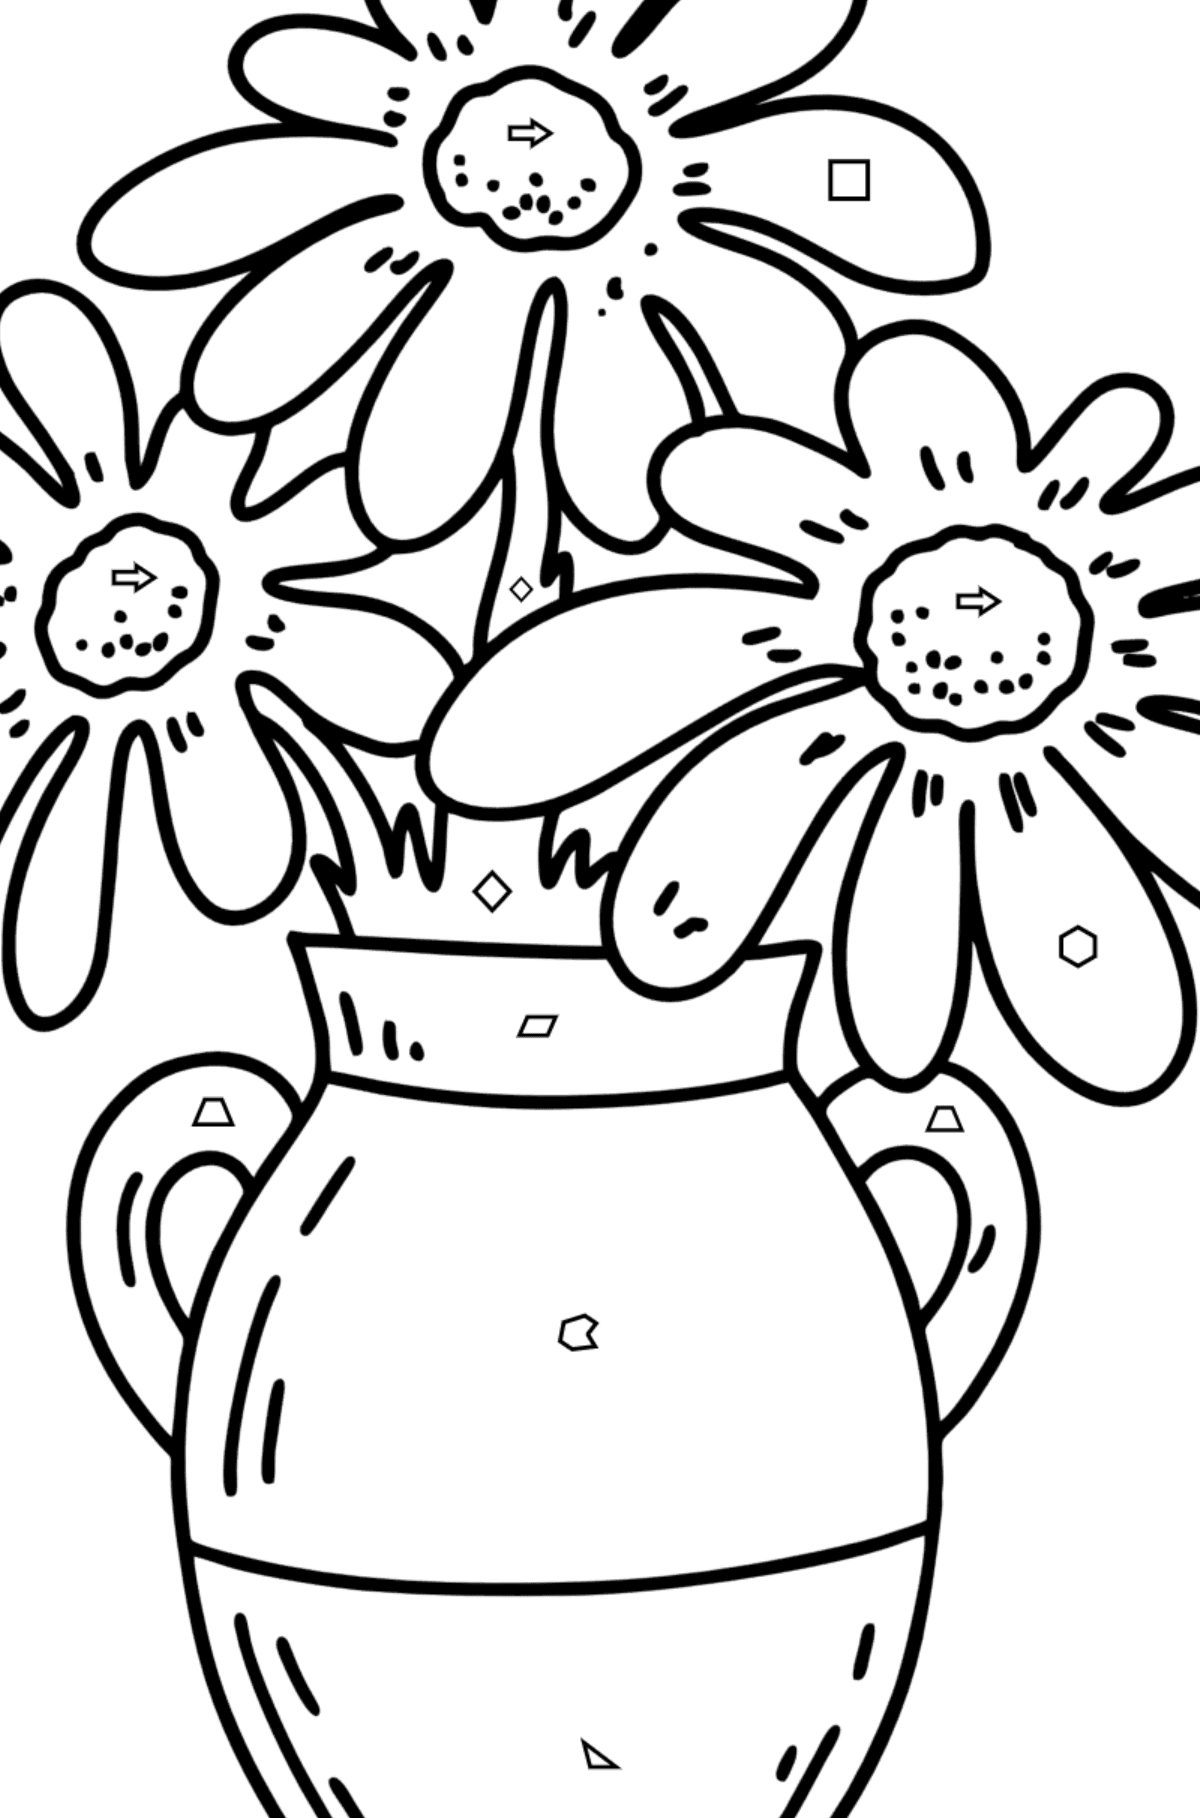 Summer Coloring page - Flowers in a vase - Coloring by Geometric Shapes for Kids